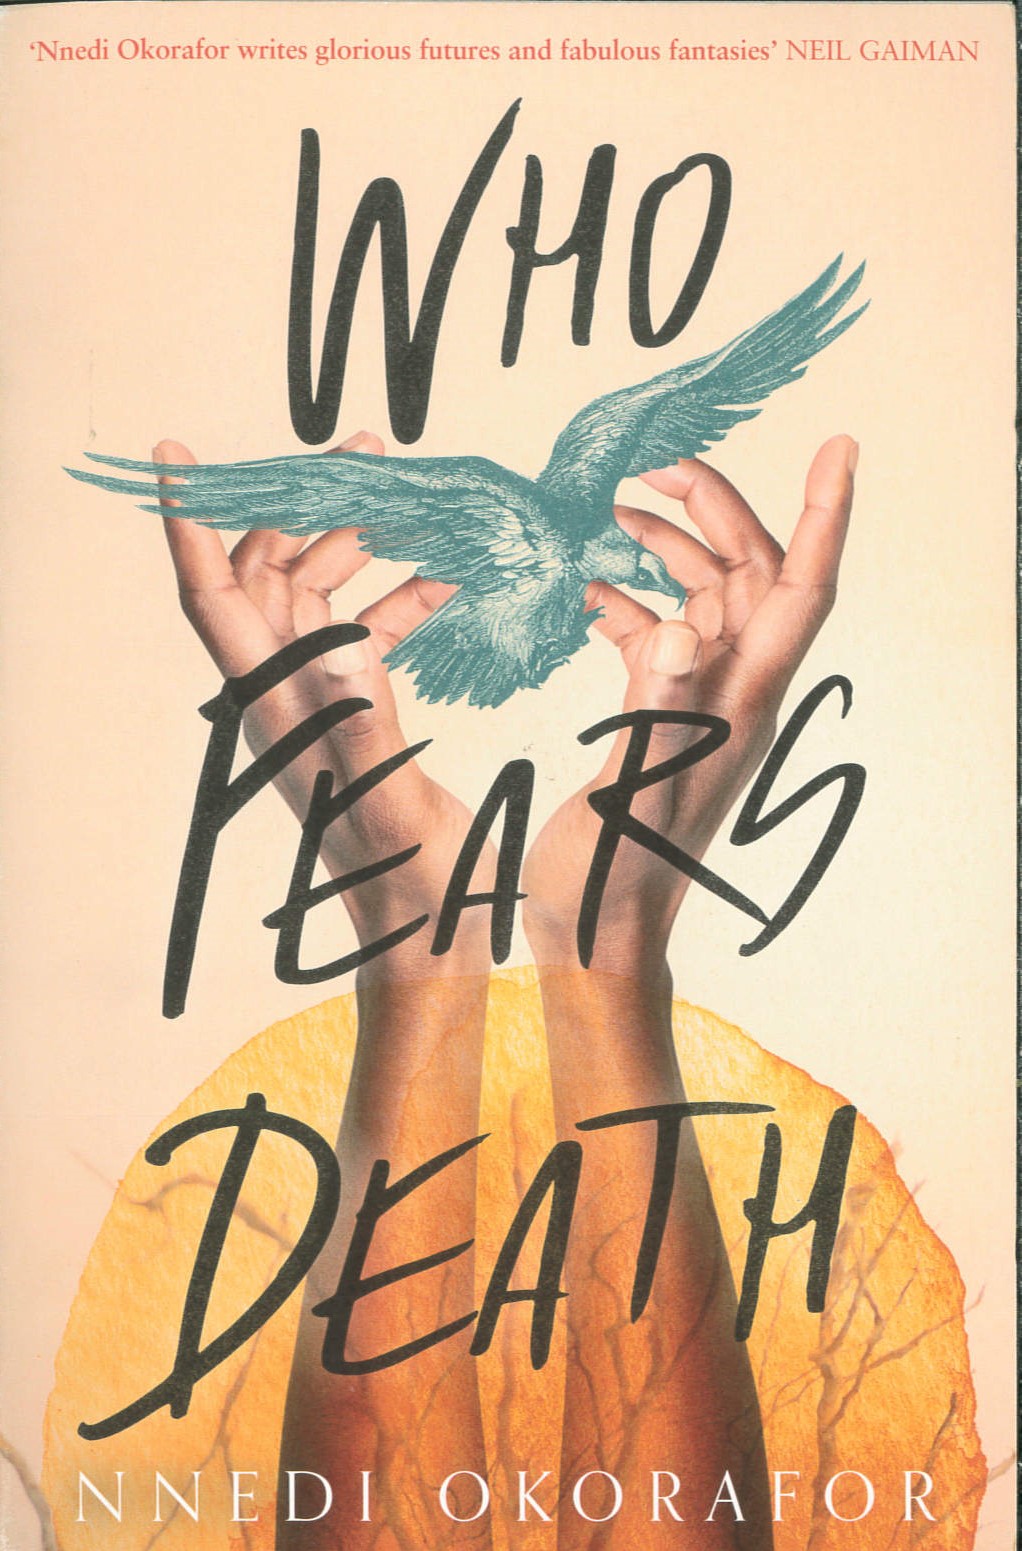 Who fears death /